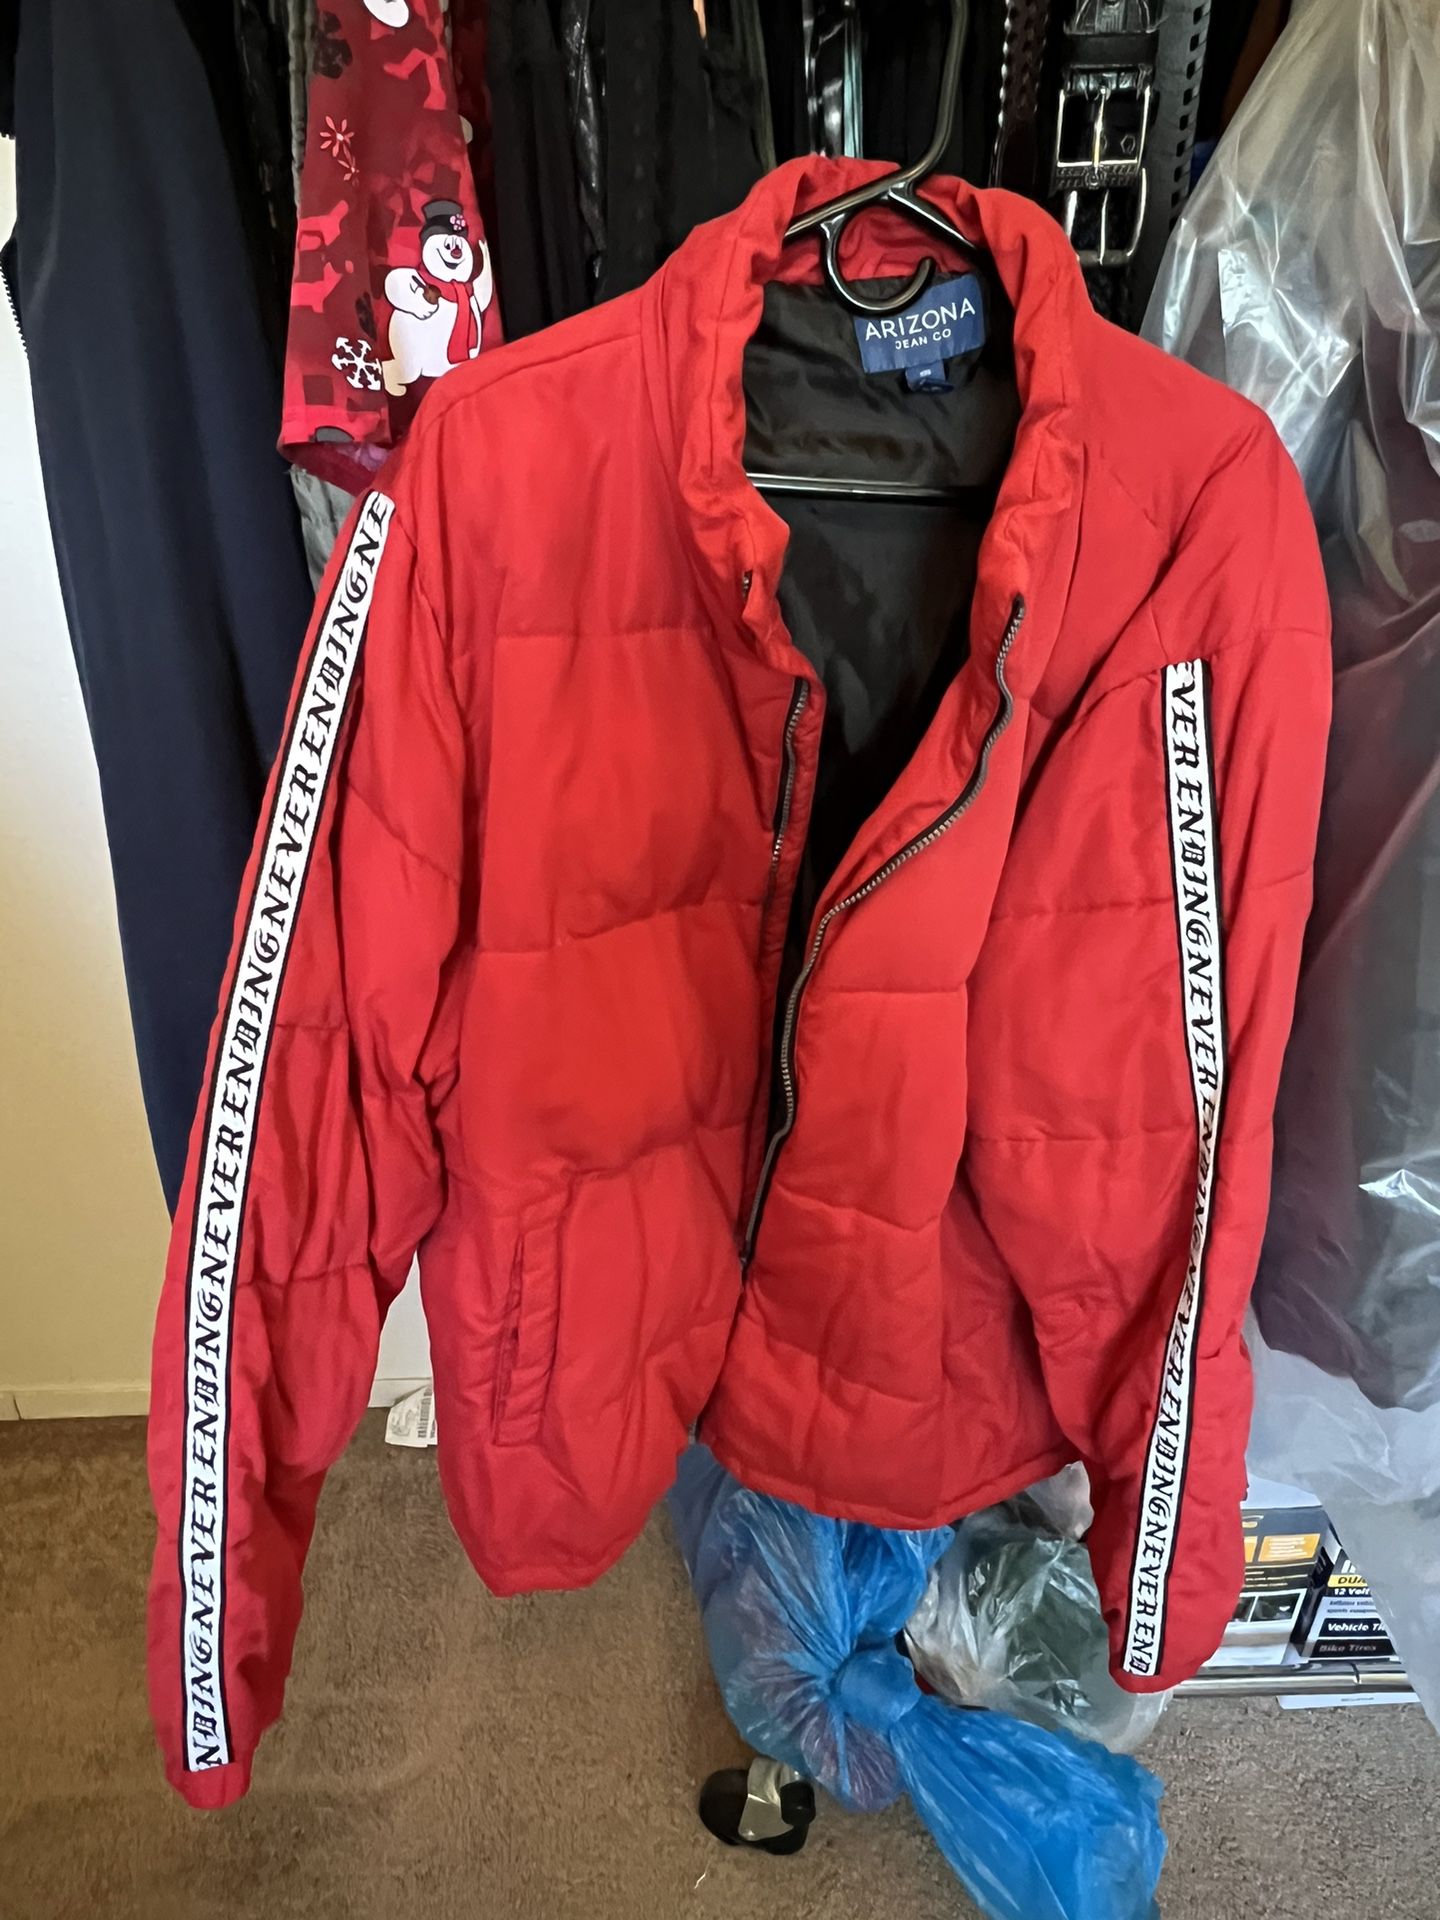 Mens Size 2x Outdoor Jackets And Hoodies For Sale